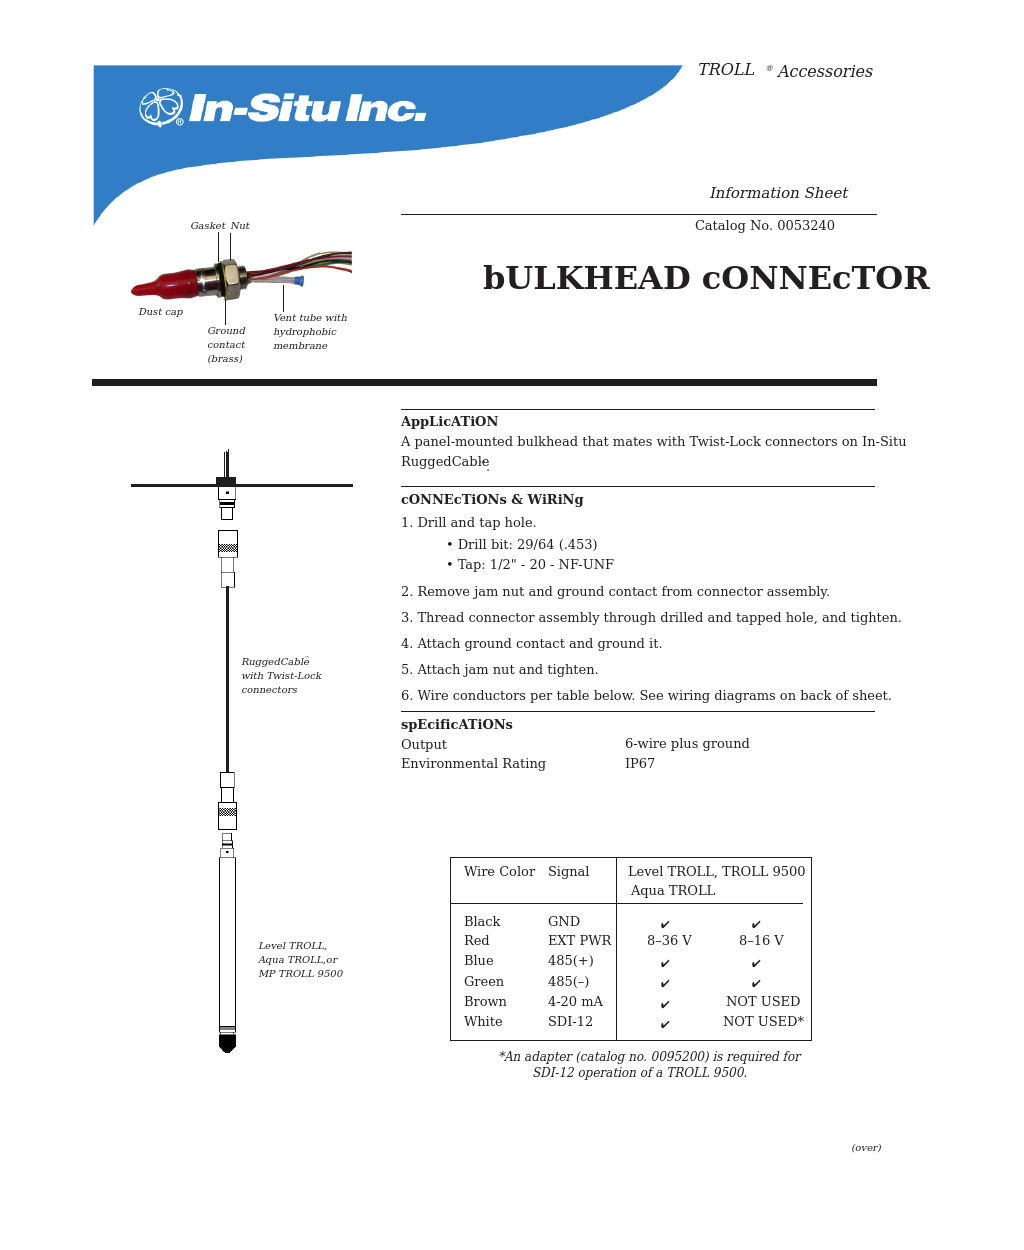 Bulkhead Connector for Use with RuggedCable Systems